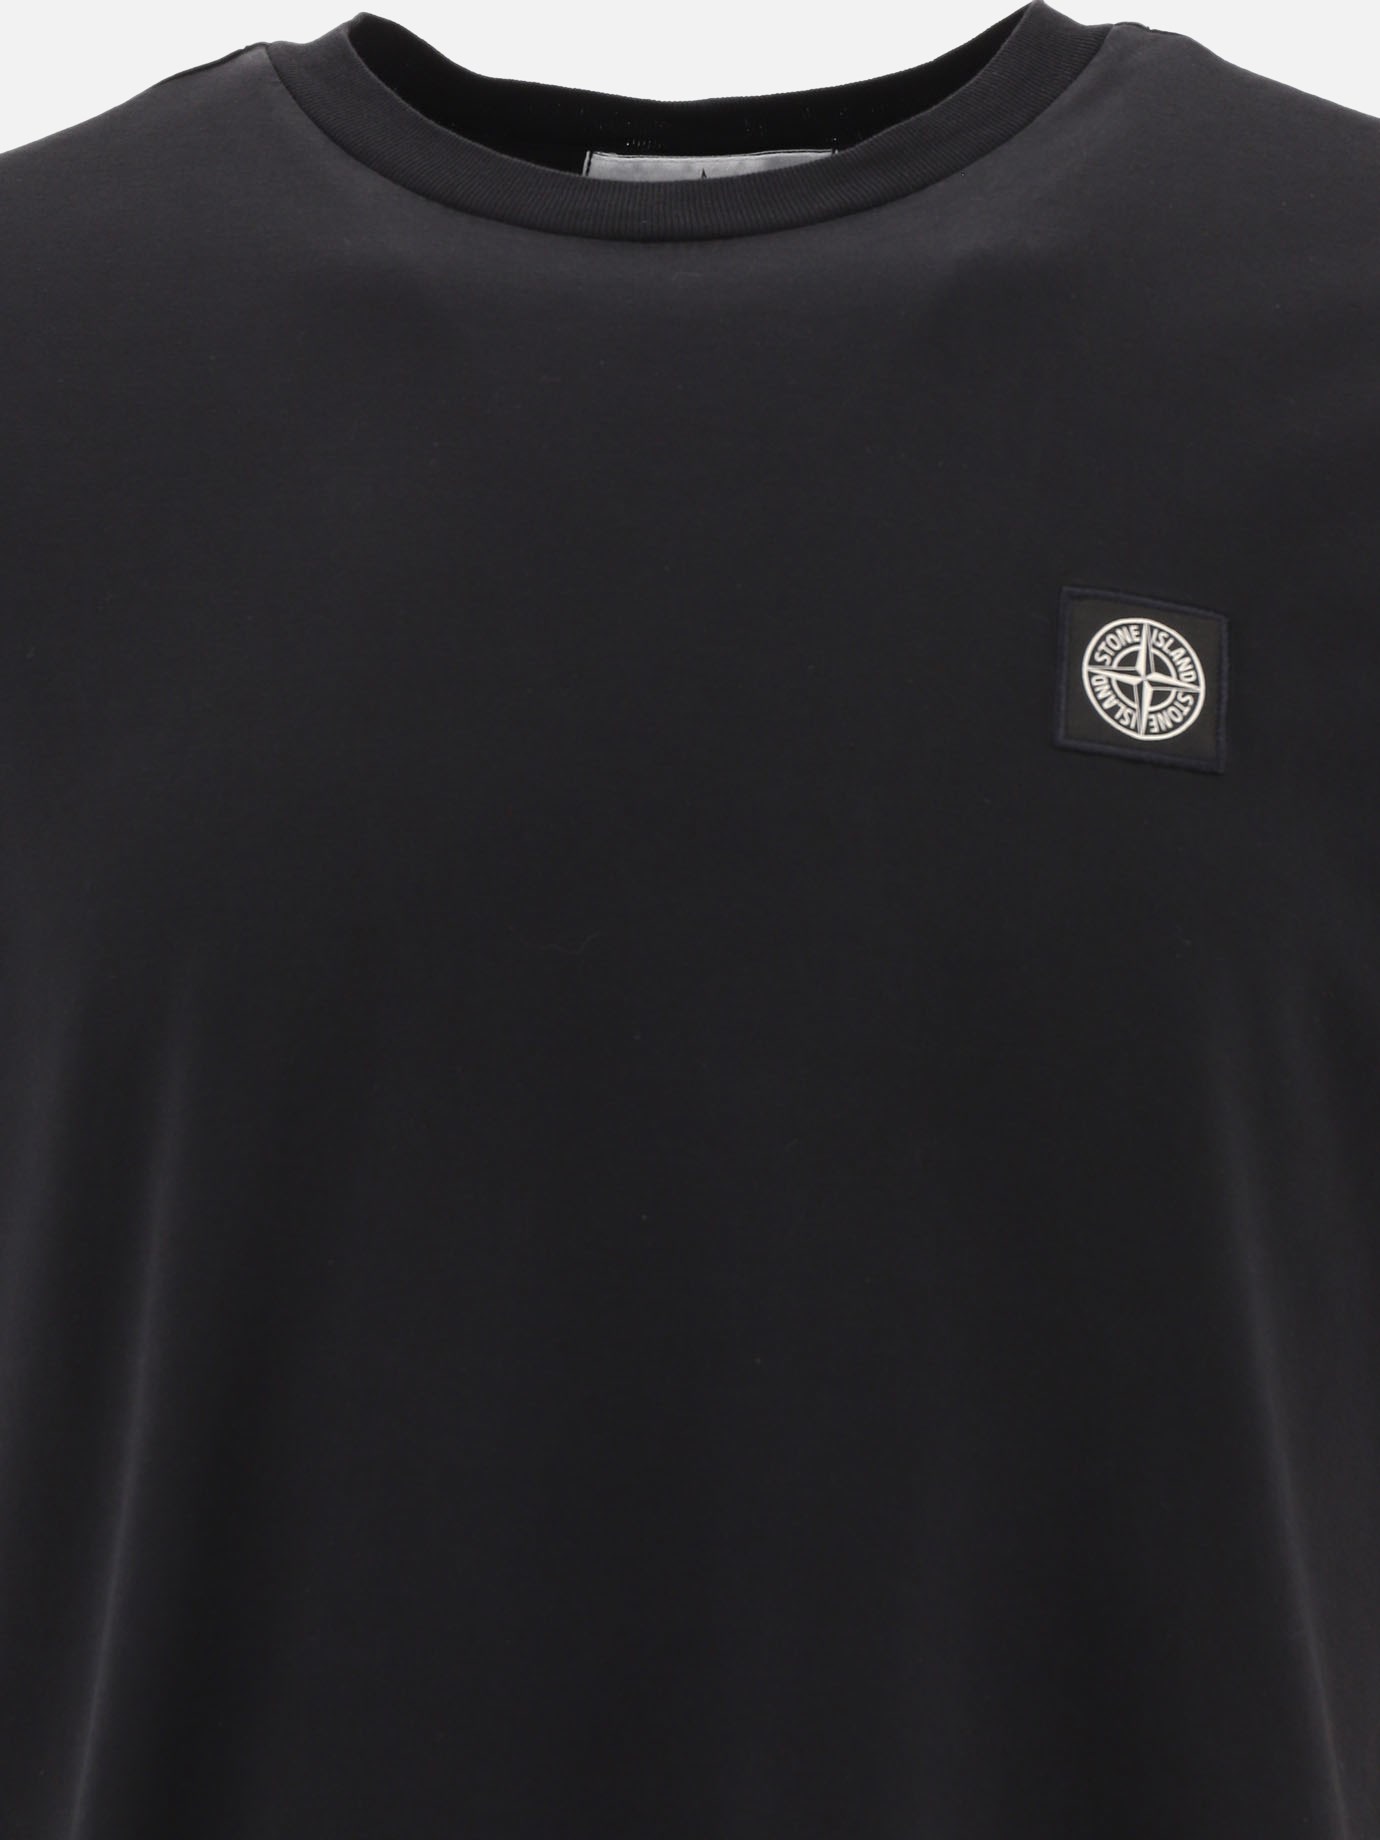  Compass  t-shirt by Stone Island